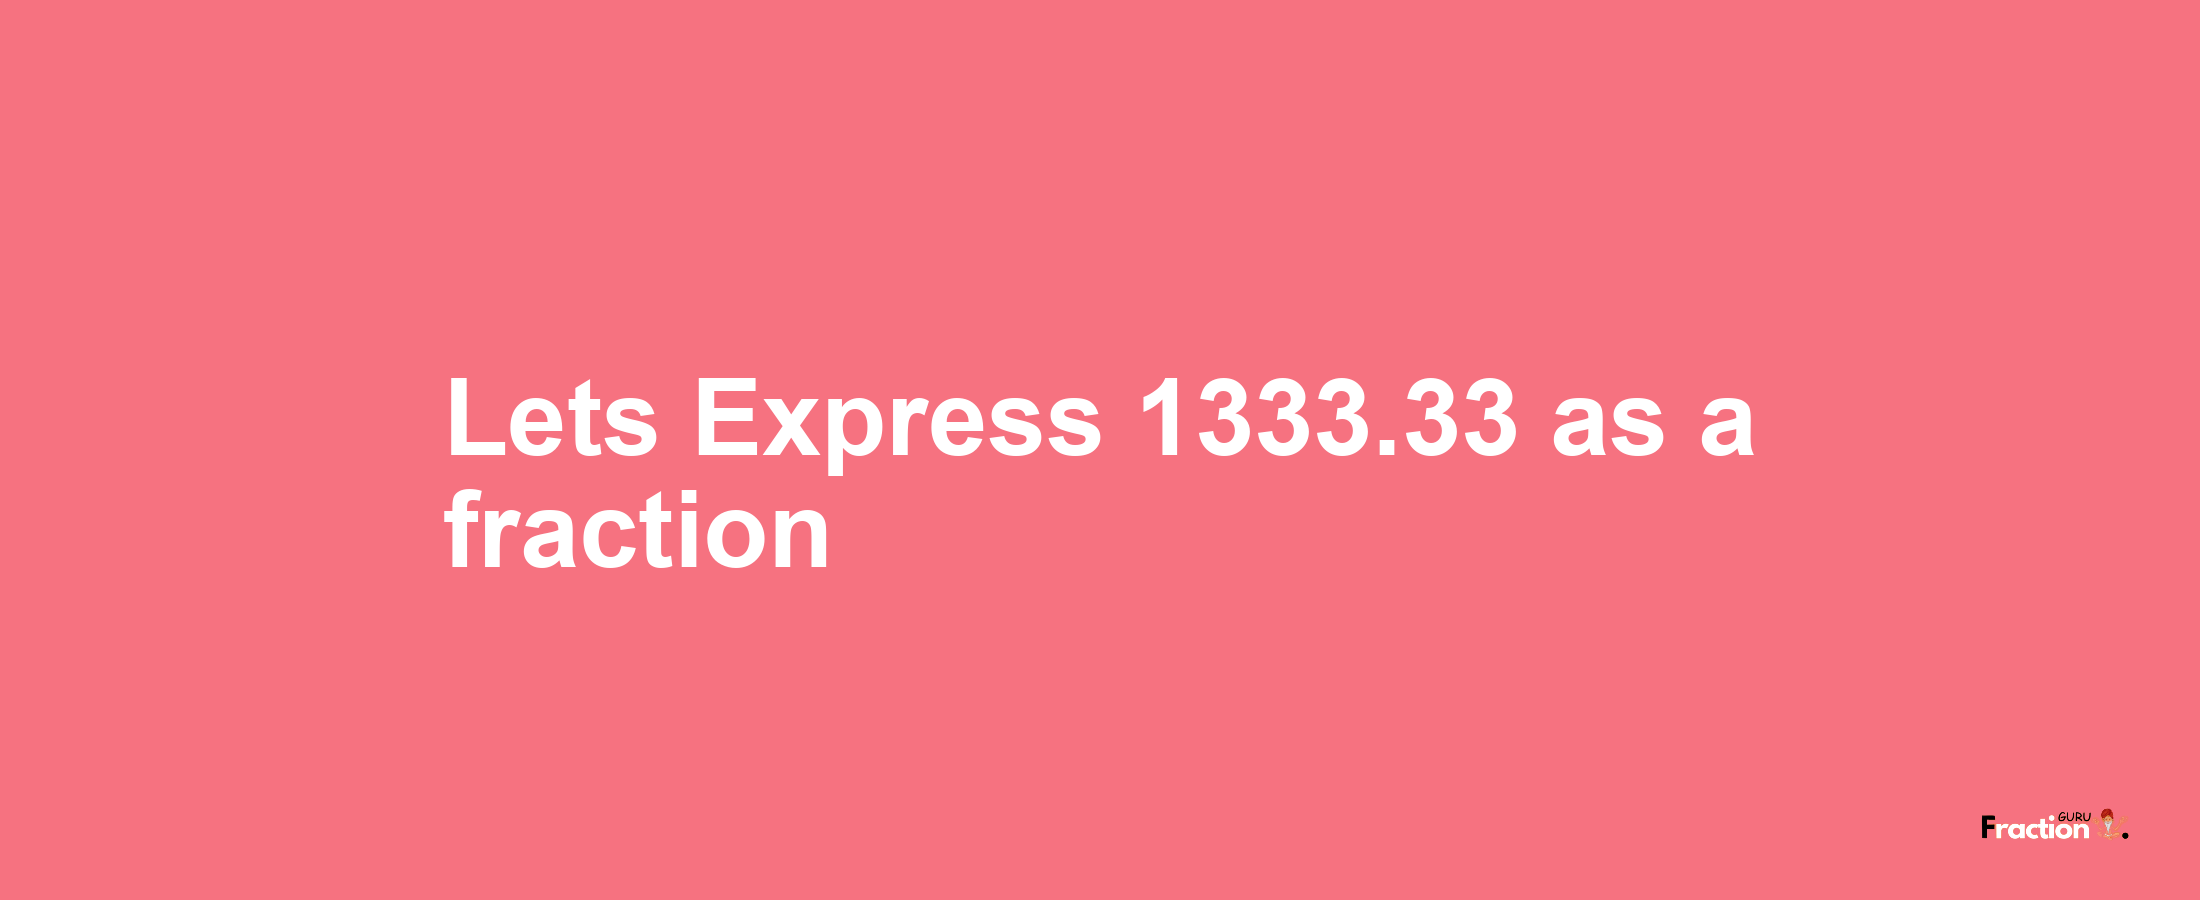 Lets Express 1333.33 as afraction